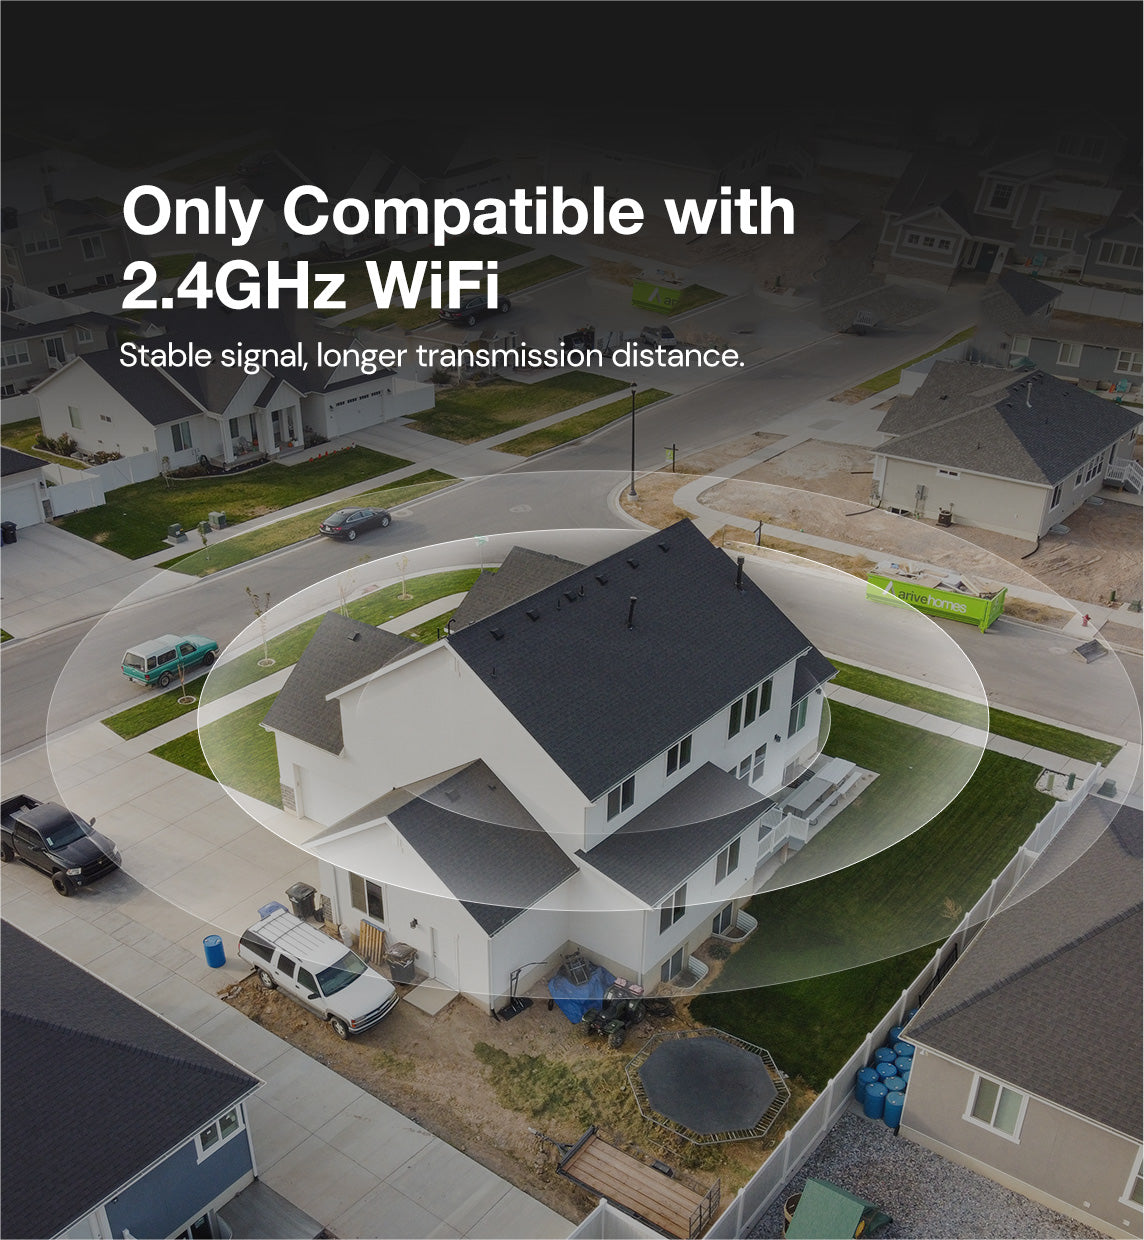 only compatible with 2.4GHz WiFi